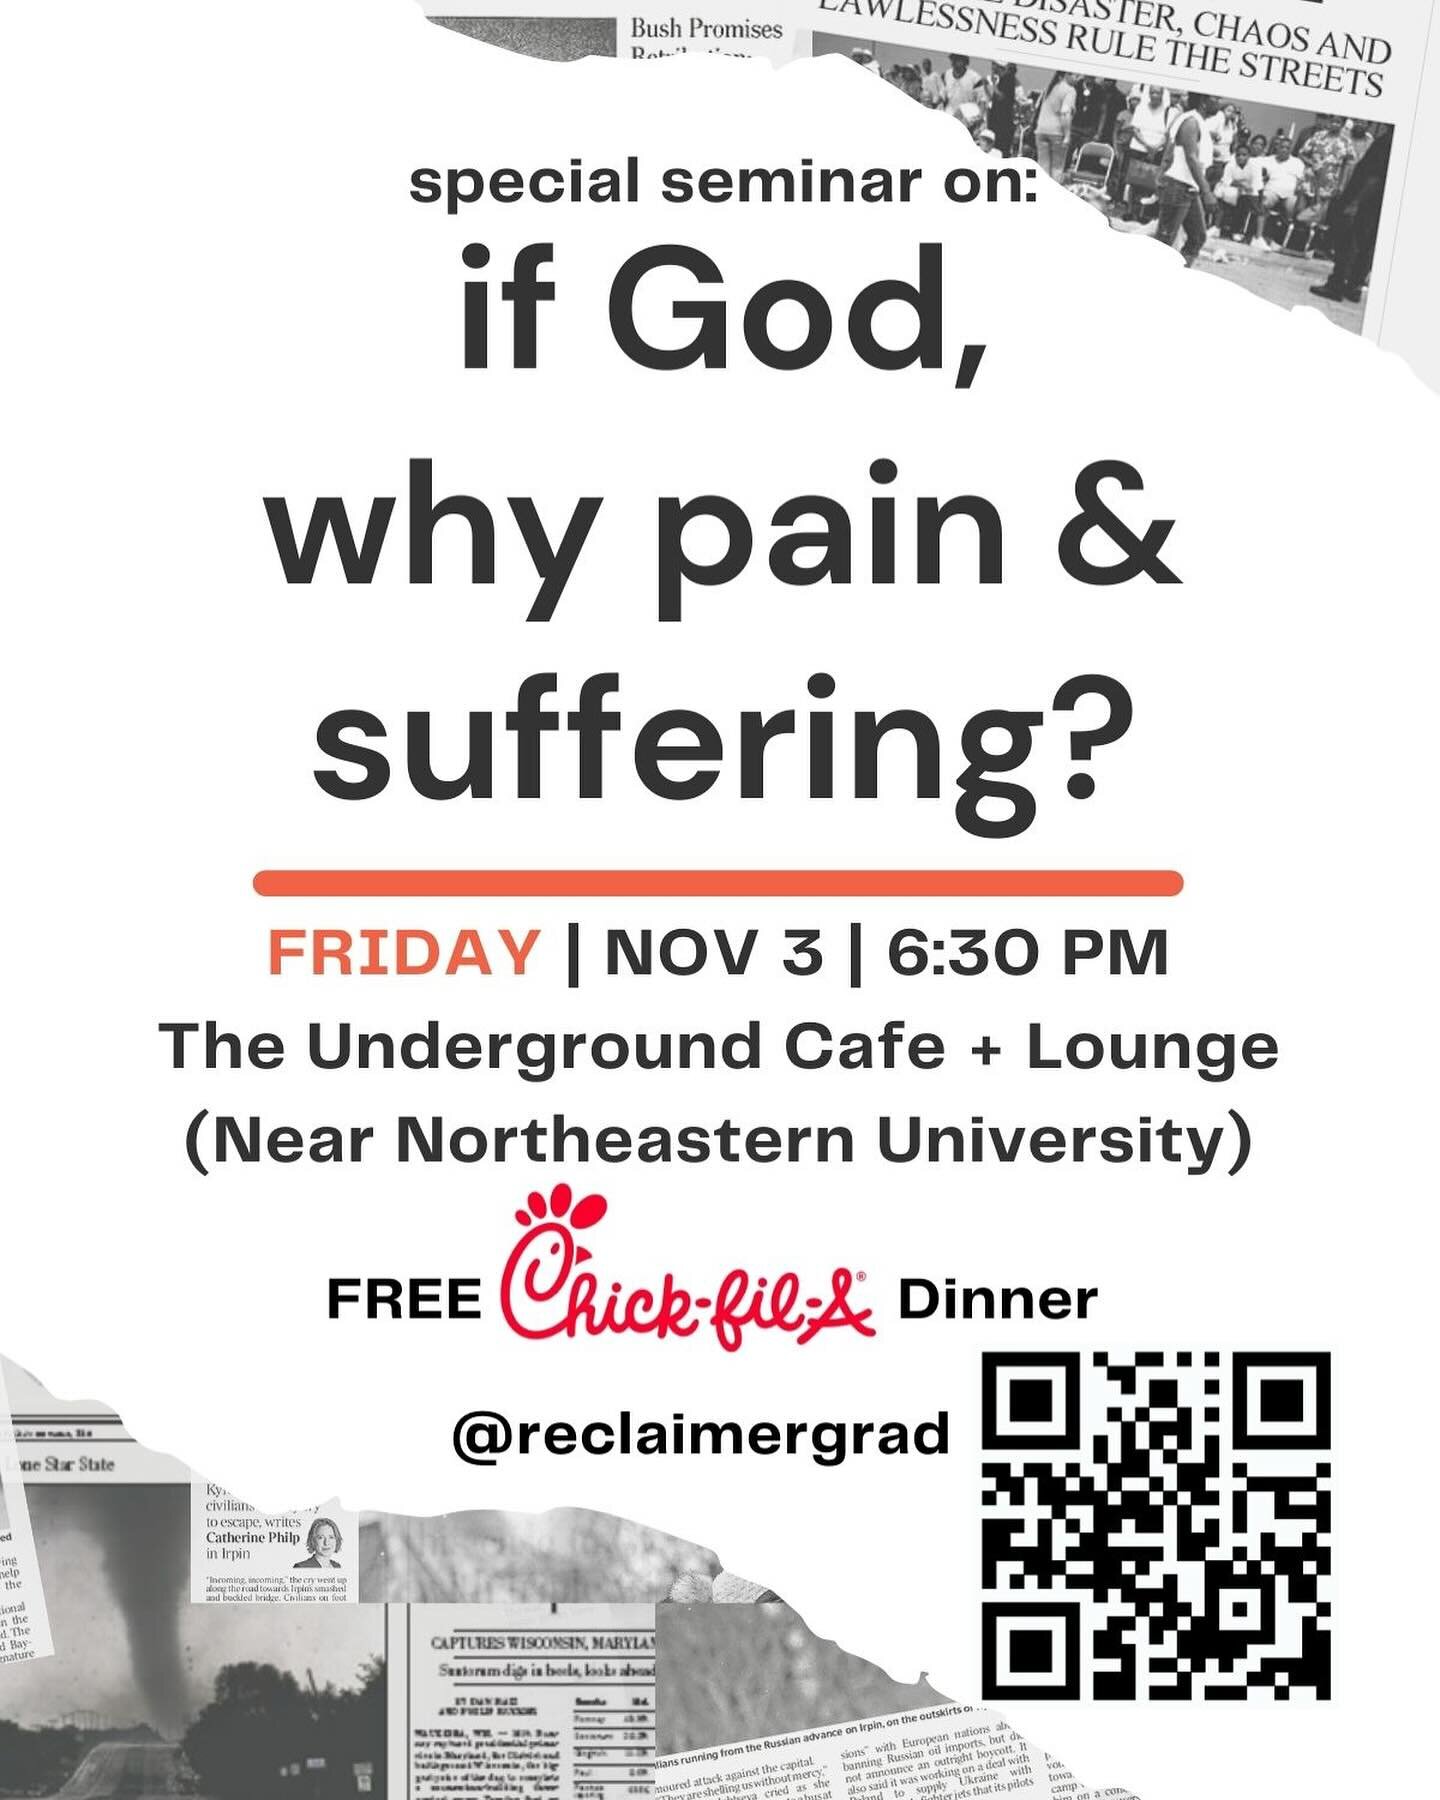 Have you ever asked yourself why there is pain and suffering in the world? Is pain and suffering against the reality of God? Come to listen to Christian perspectives.  #god #godandpain #gradstudents #gradboston #specialtalk